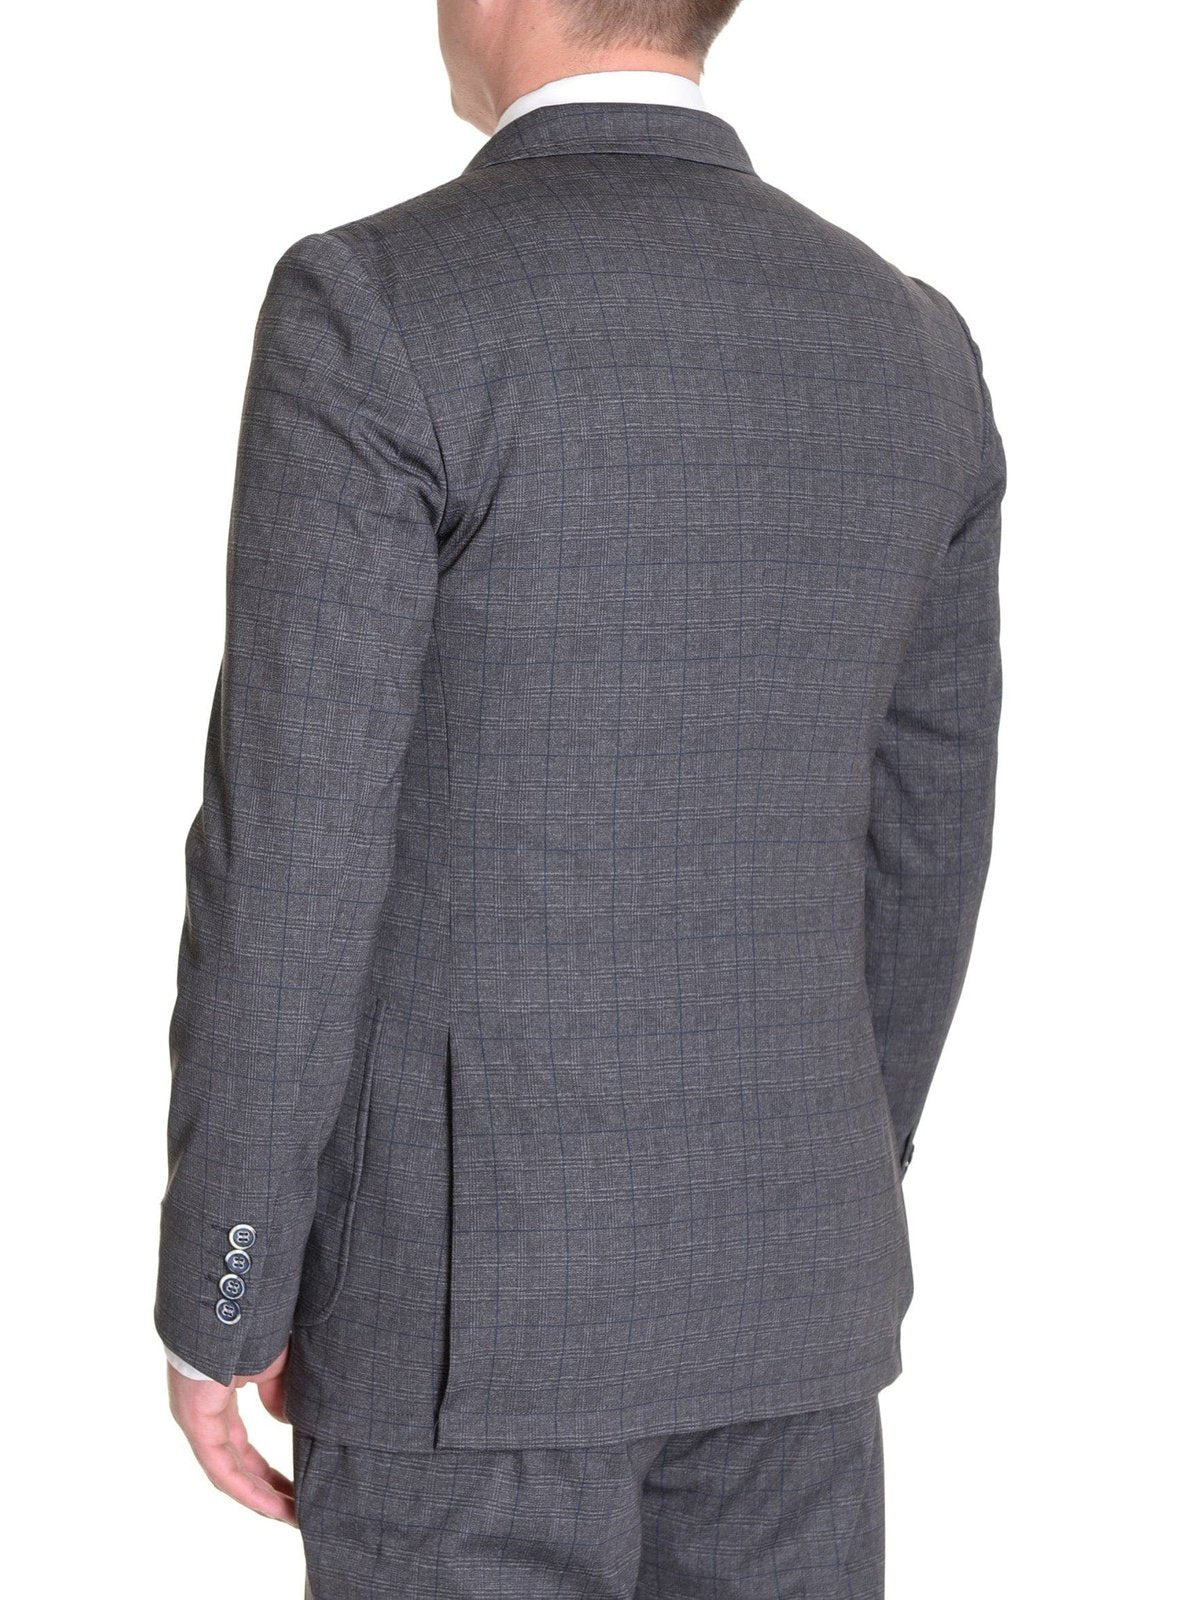 thesuitdepot Sale Suits Extra Slim Fit Gray Plaid Half Lined Stretch Suit With Patch Pockets